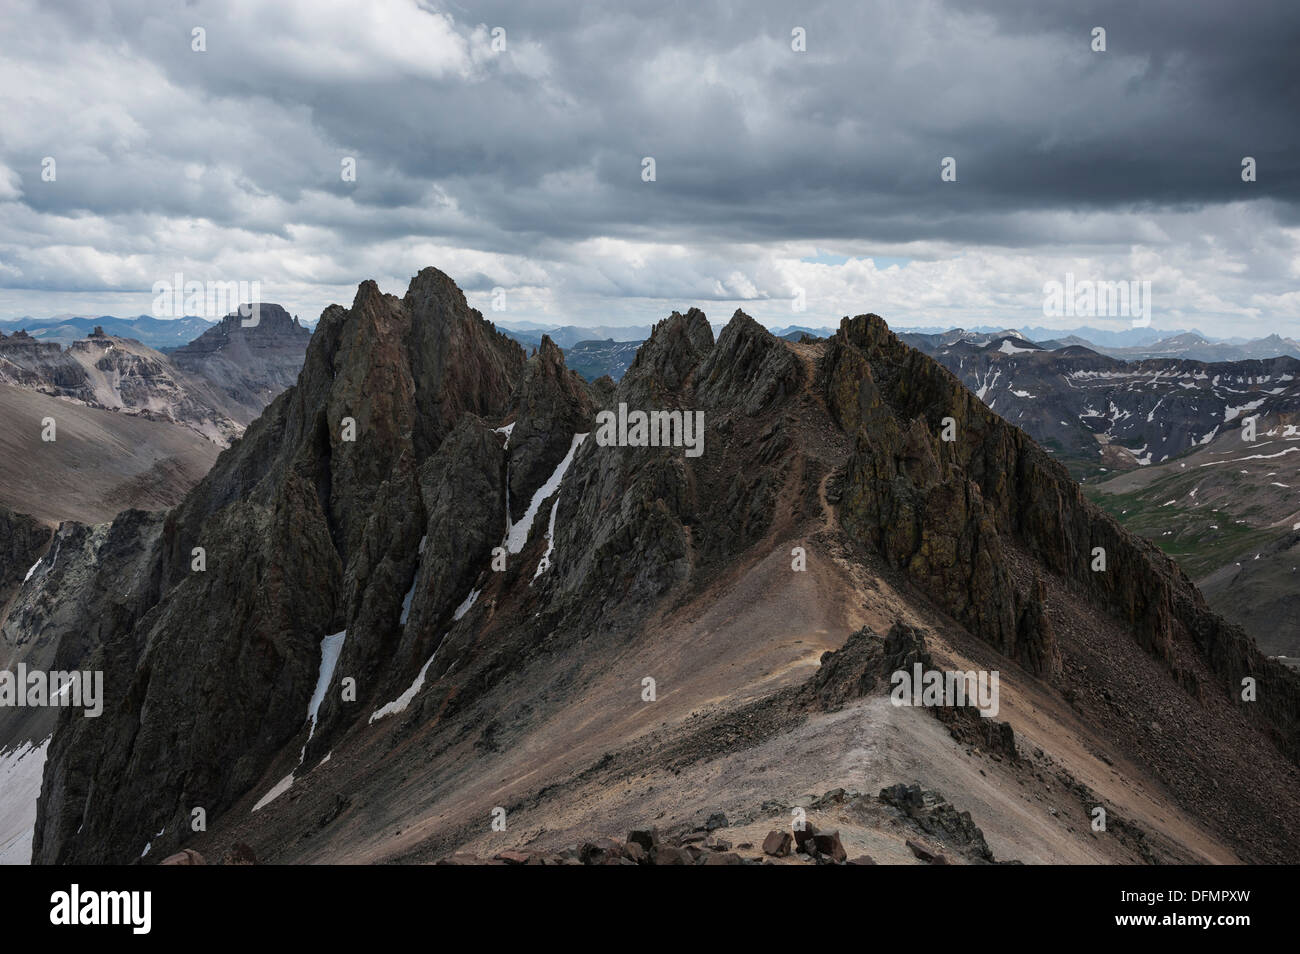 View of Lavender Col from southeast couloir on Mt. Sneffels (14150 ft), San Juan mountains, Colorado, USA Stock Photo